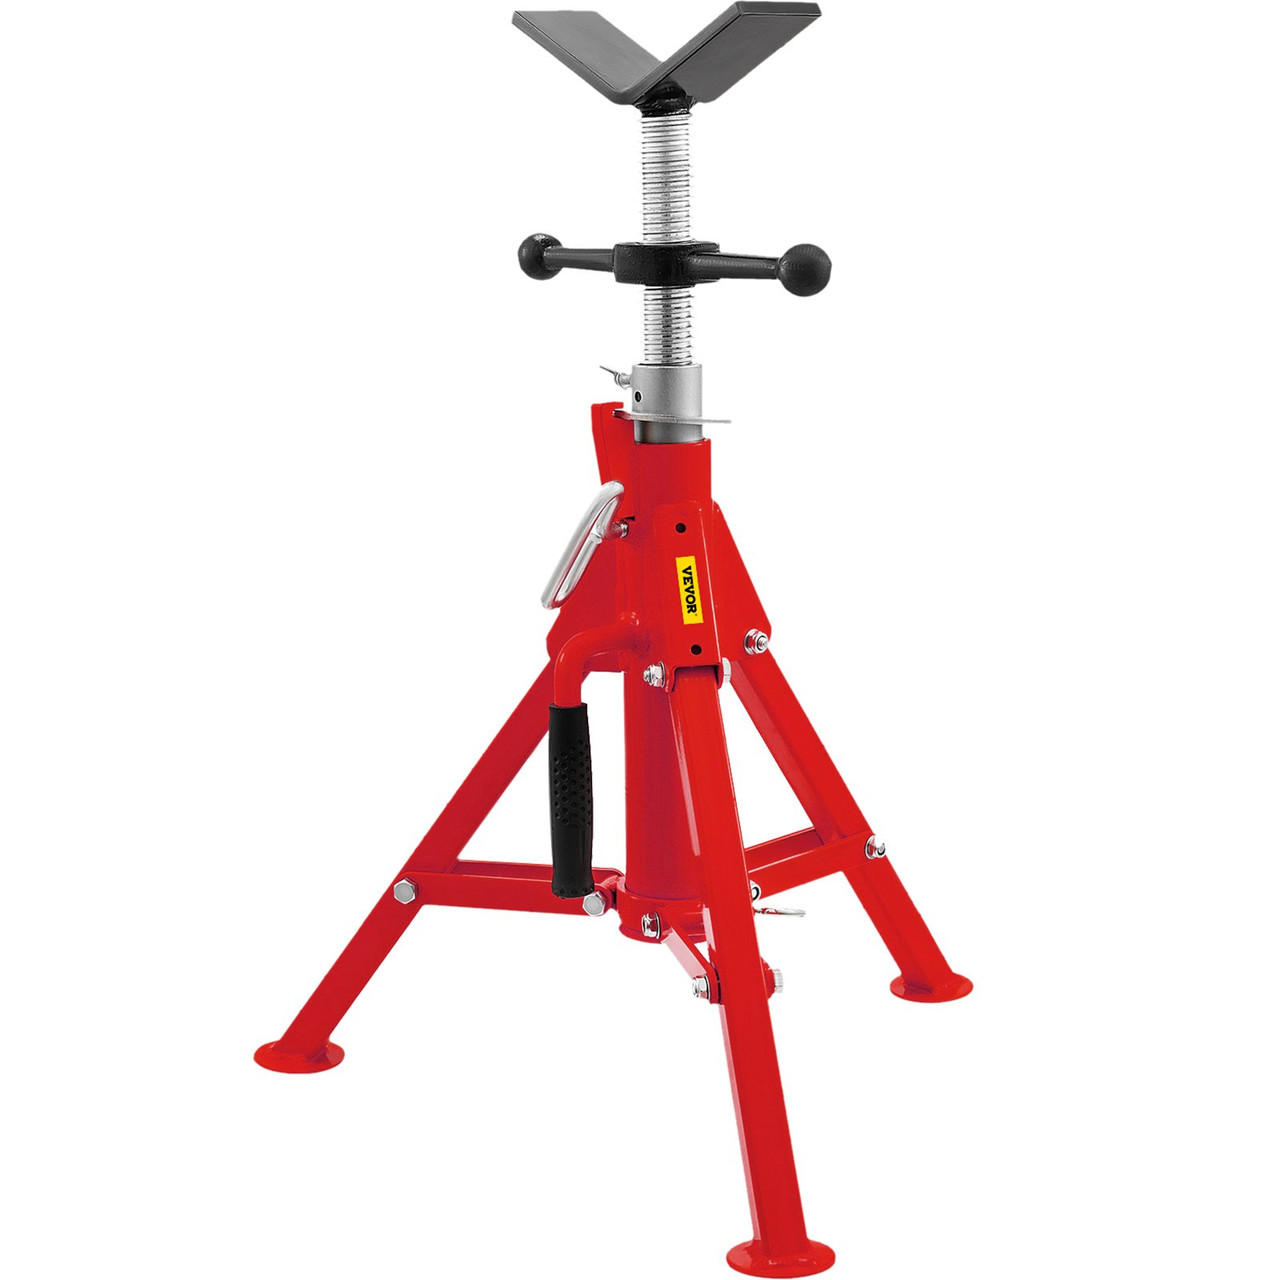 V Head Pipe Stand 1/8"-12" Capacity,Adjustable Height 20"-37",Pipe Jack Stands 2500 lb. Load Capacity,Portable Folding Pipe Stands, Carbon Steel Body More Durable